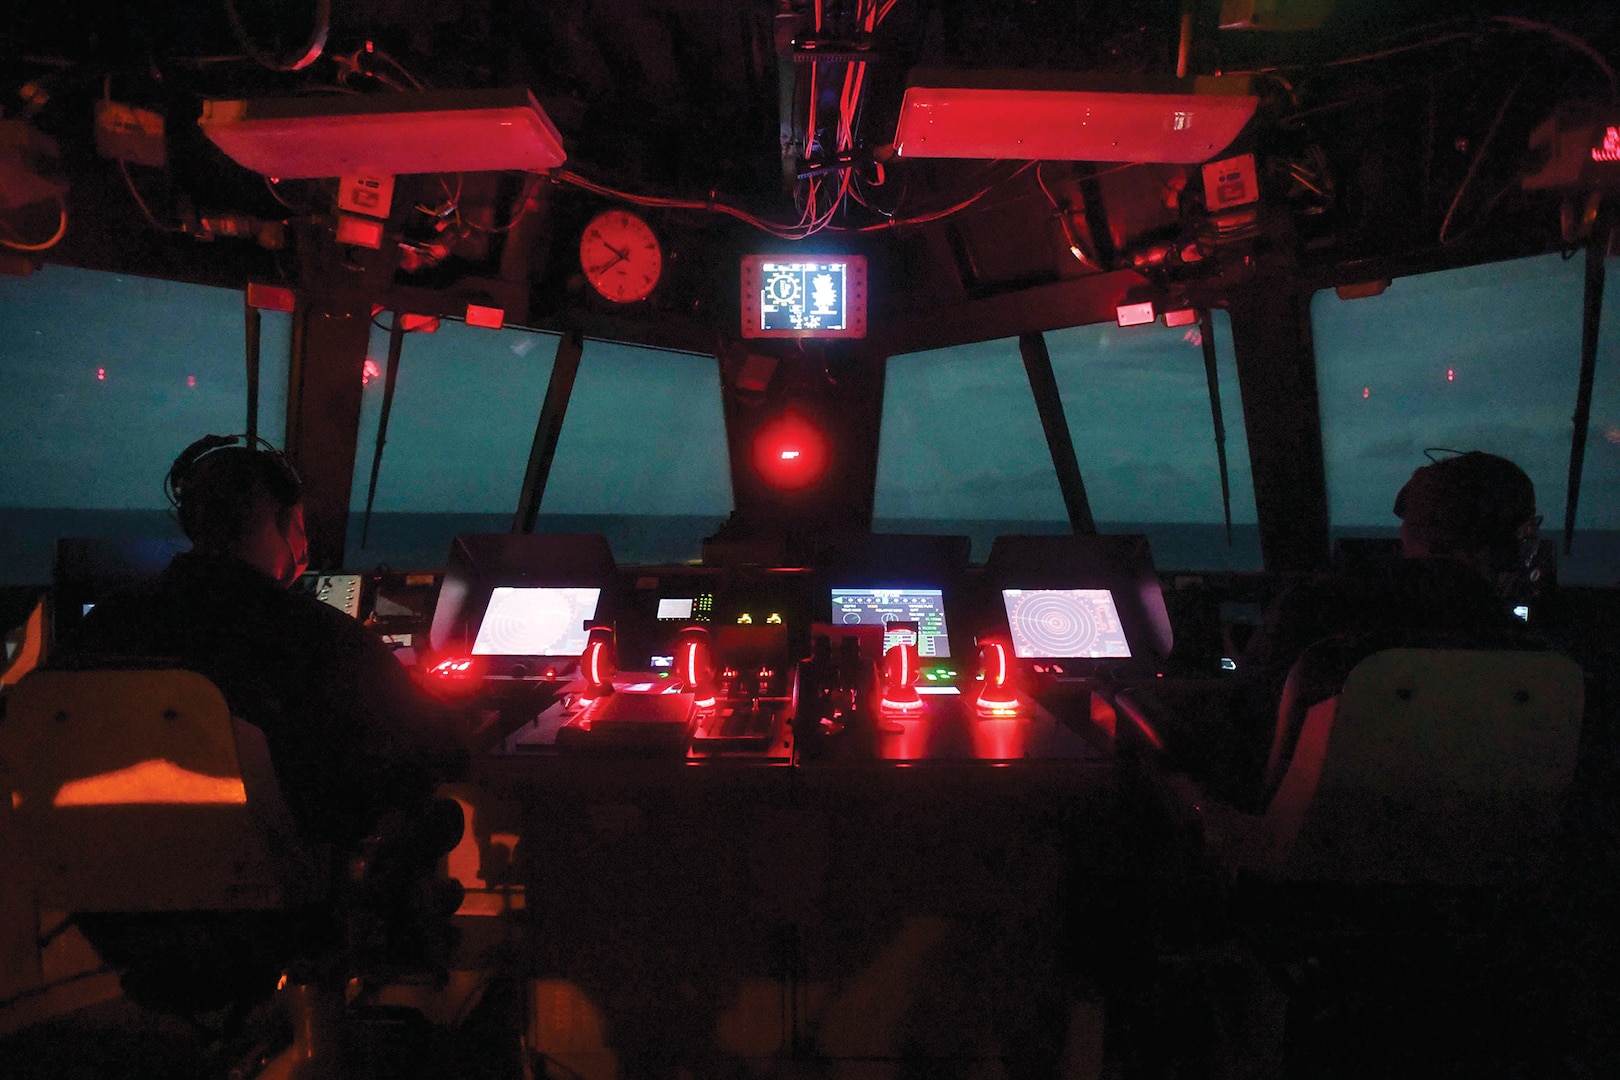 Navy Lt. j.g. Justin Bishop and Chief Petty Officer David Thompson keep watch in the navigation bridge aboard the USS
Sioux City in the Caribbean Sea.” December 21, 2020 (Photo by Navy Seaman Juel Foster, Nov. 23, 2020)